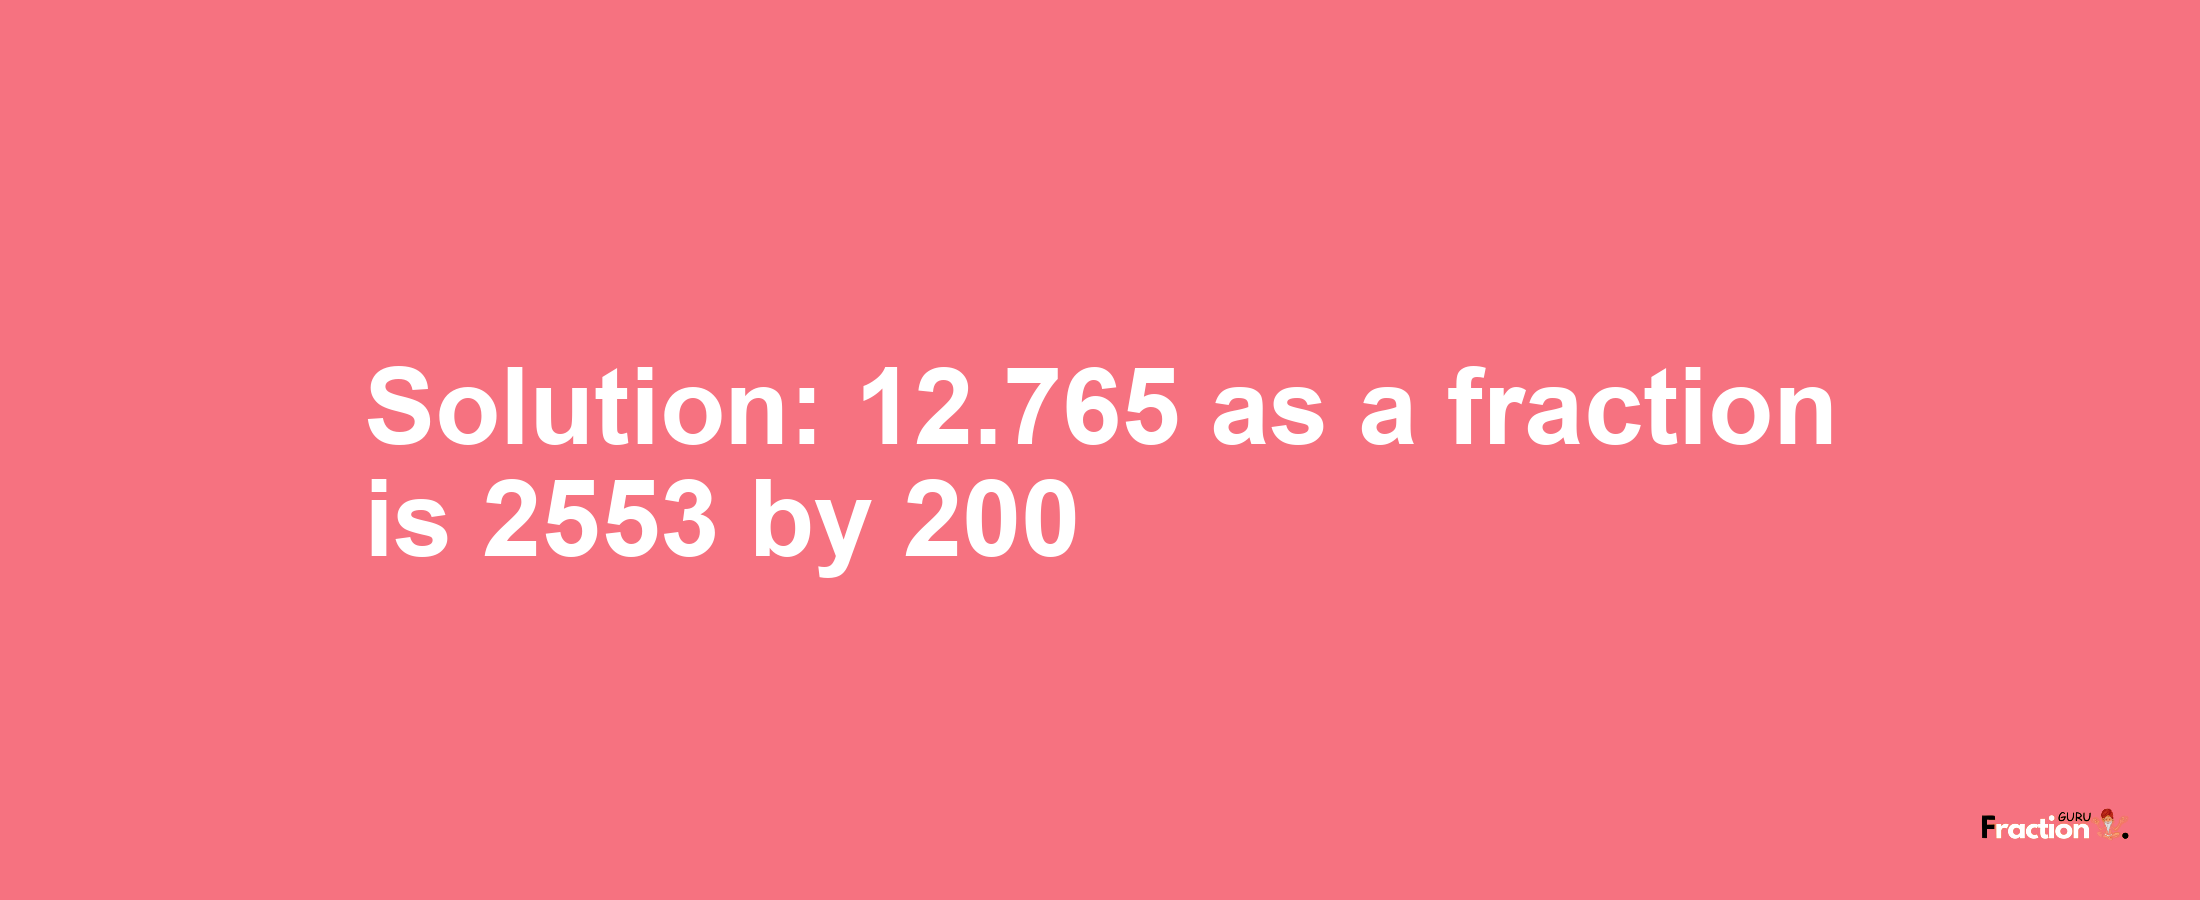 Solution:12.765 as a fraction is 2553/200